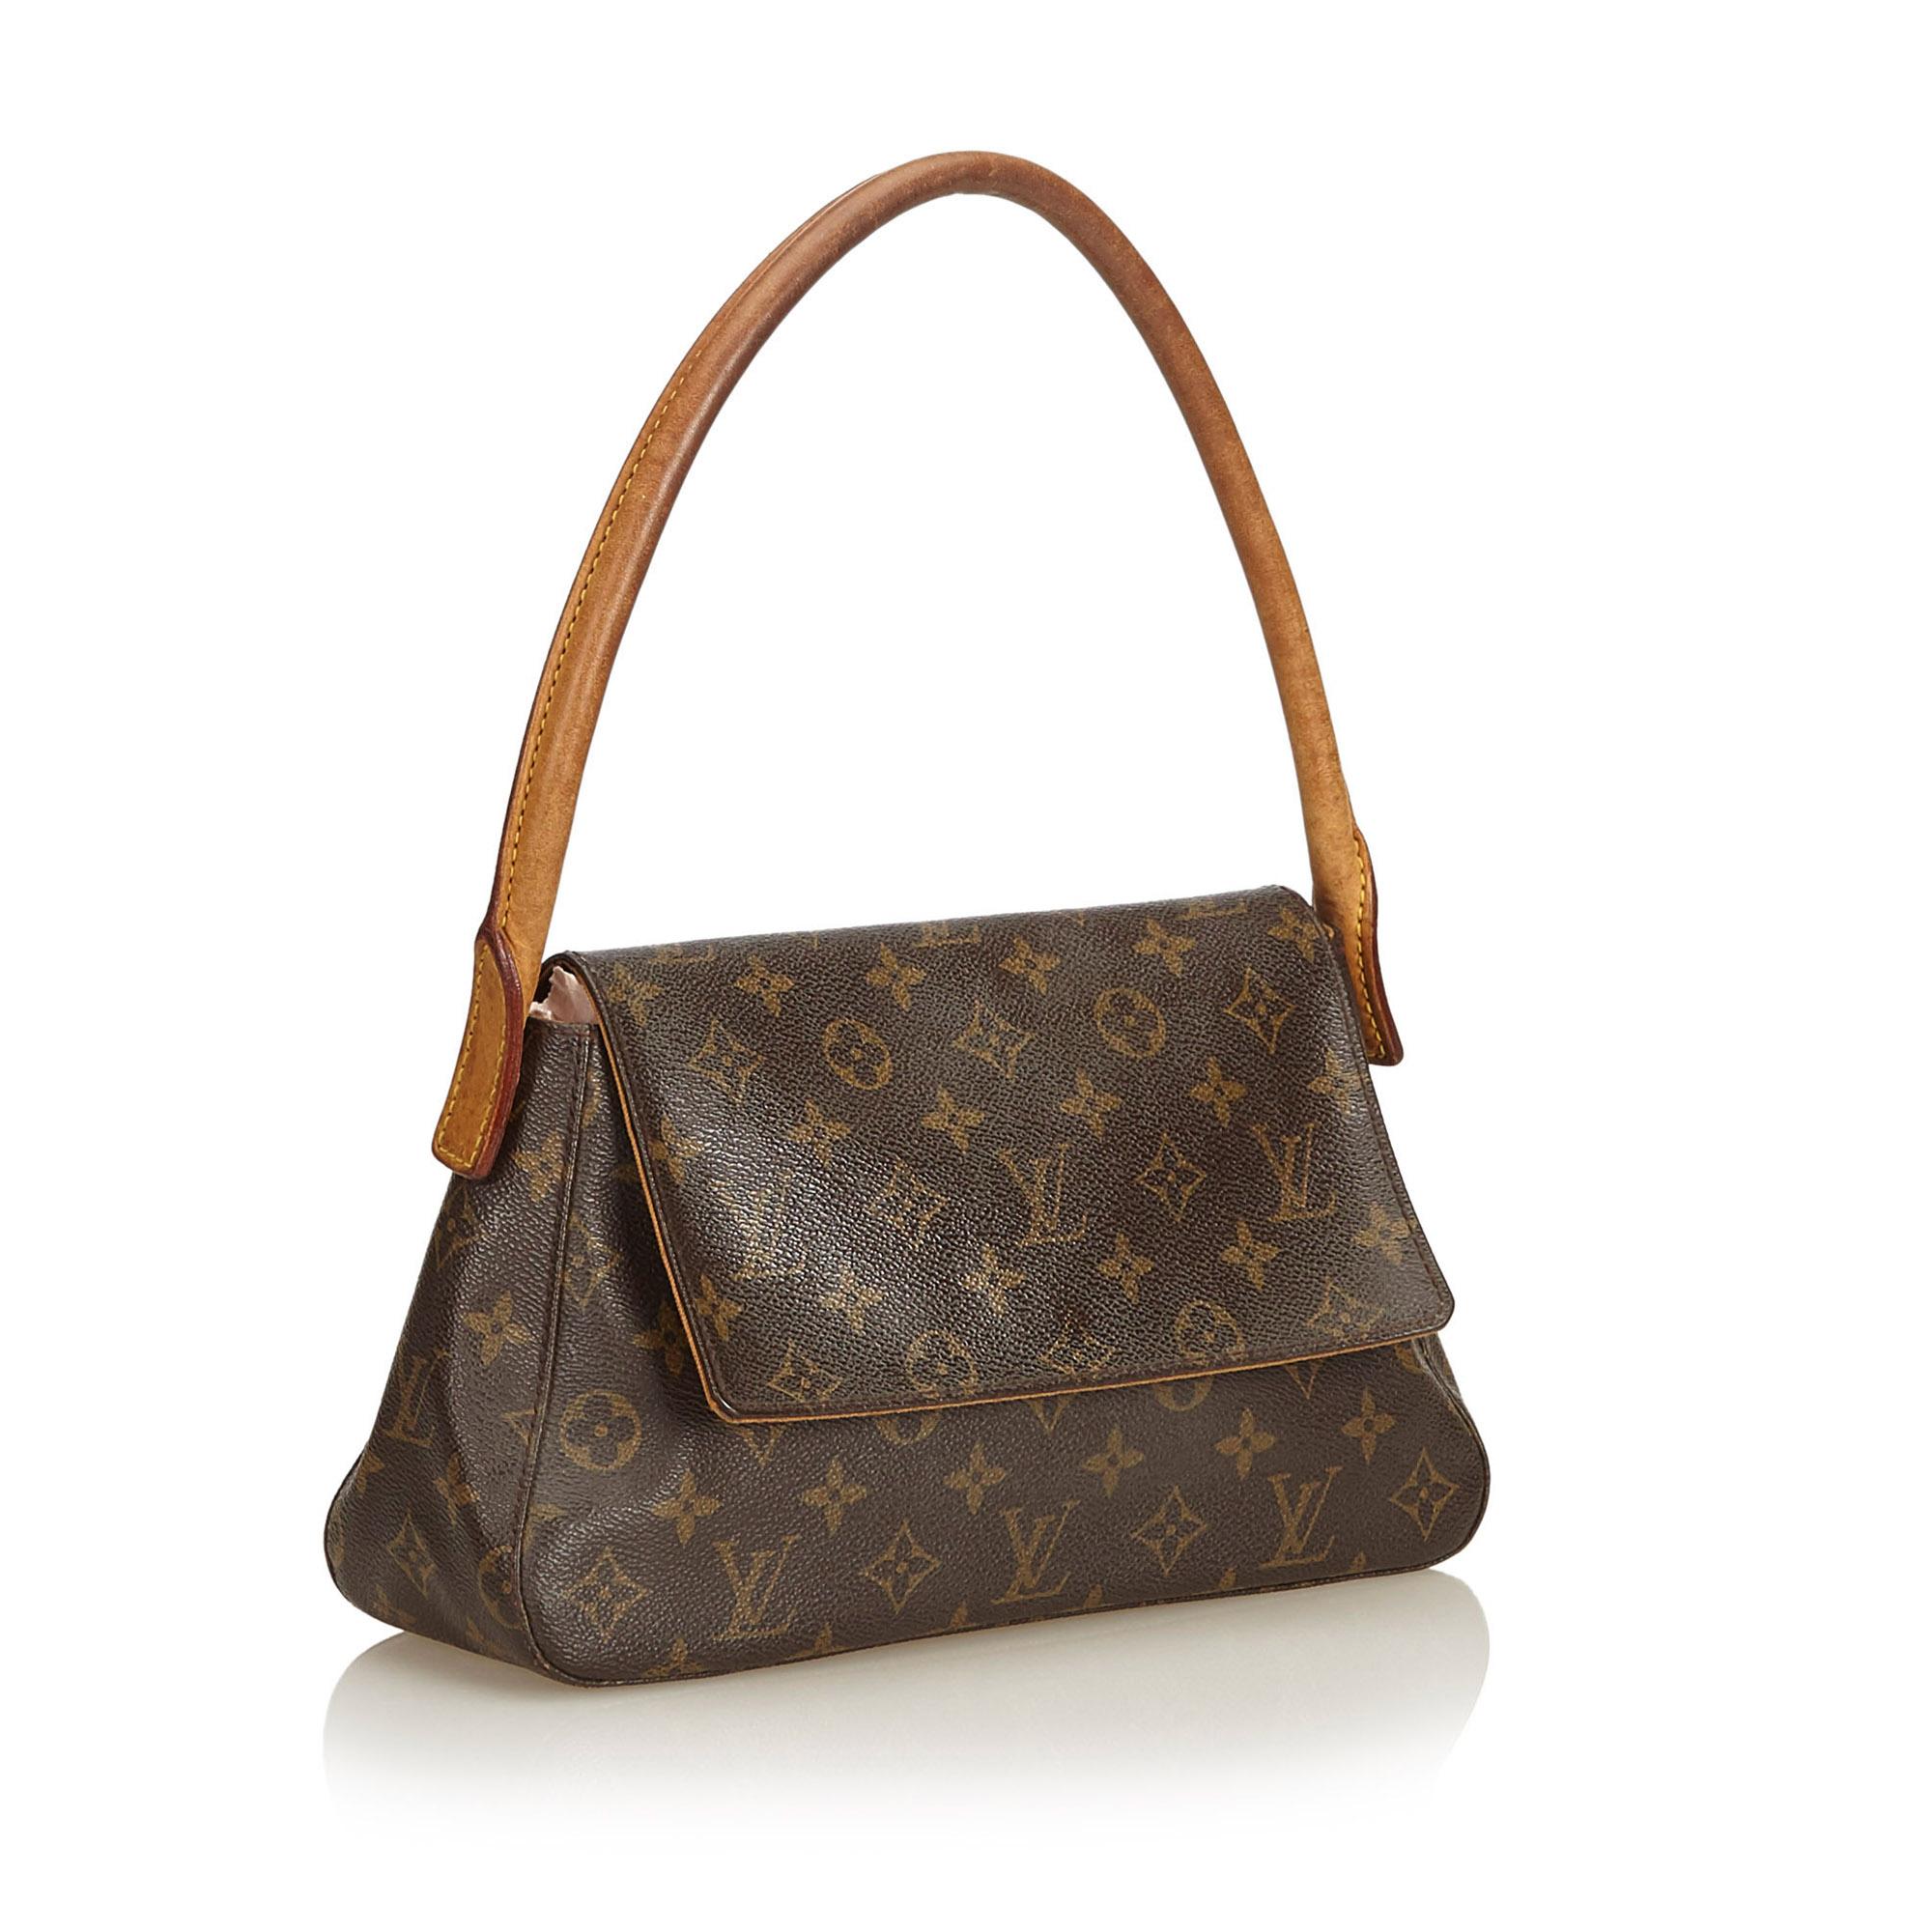 The Mini Looping features the Monogram canvas, a detachable vachetta handle, a front flap with a magnetic closure, textile lining, and an interior zip pocket. It carries as B condition rating.

Inclusions: 
This item does not come with